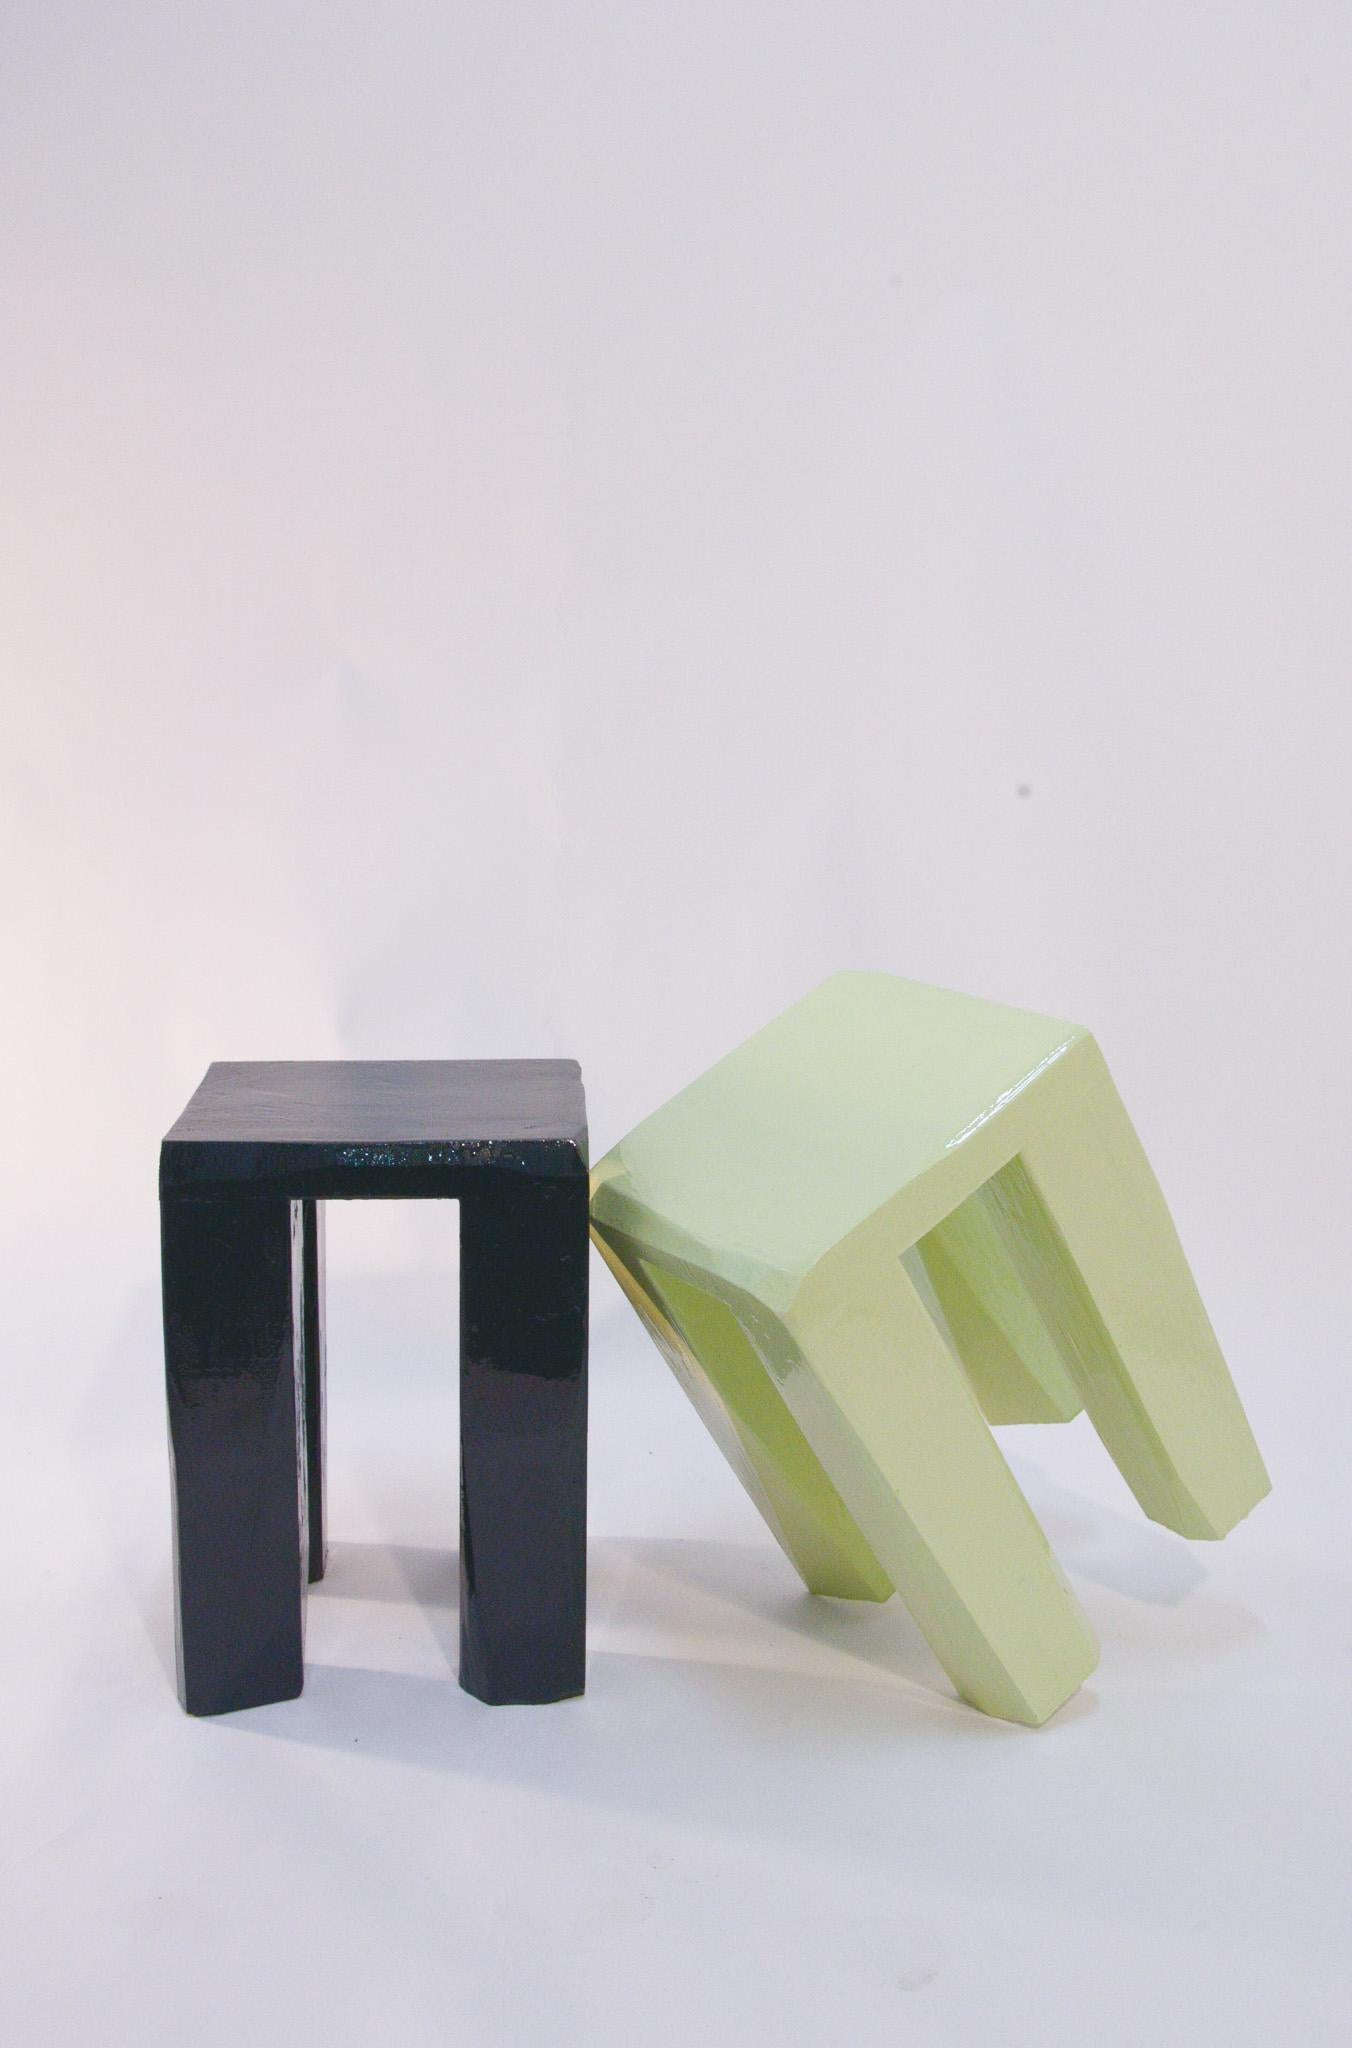 The SID 1.2 stool is fabricated in Brooklyn by designer David Larsson. These solid wood stools are made to order and can be customized by color. The epoxy adds a unique texture to the high gloss finish, with a hand made quality that guarantees each